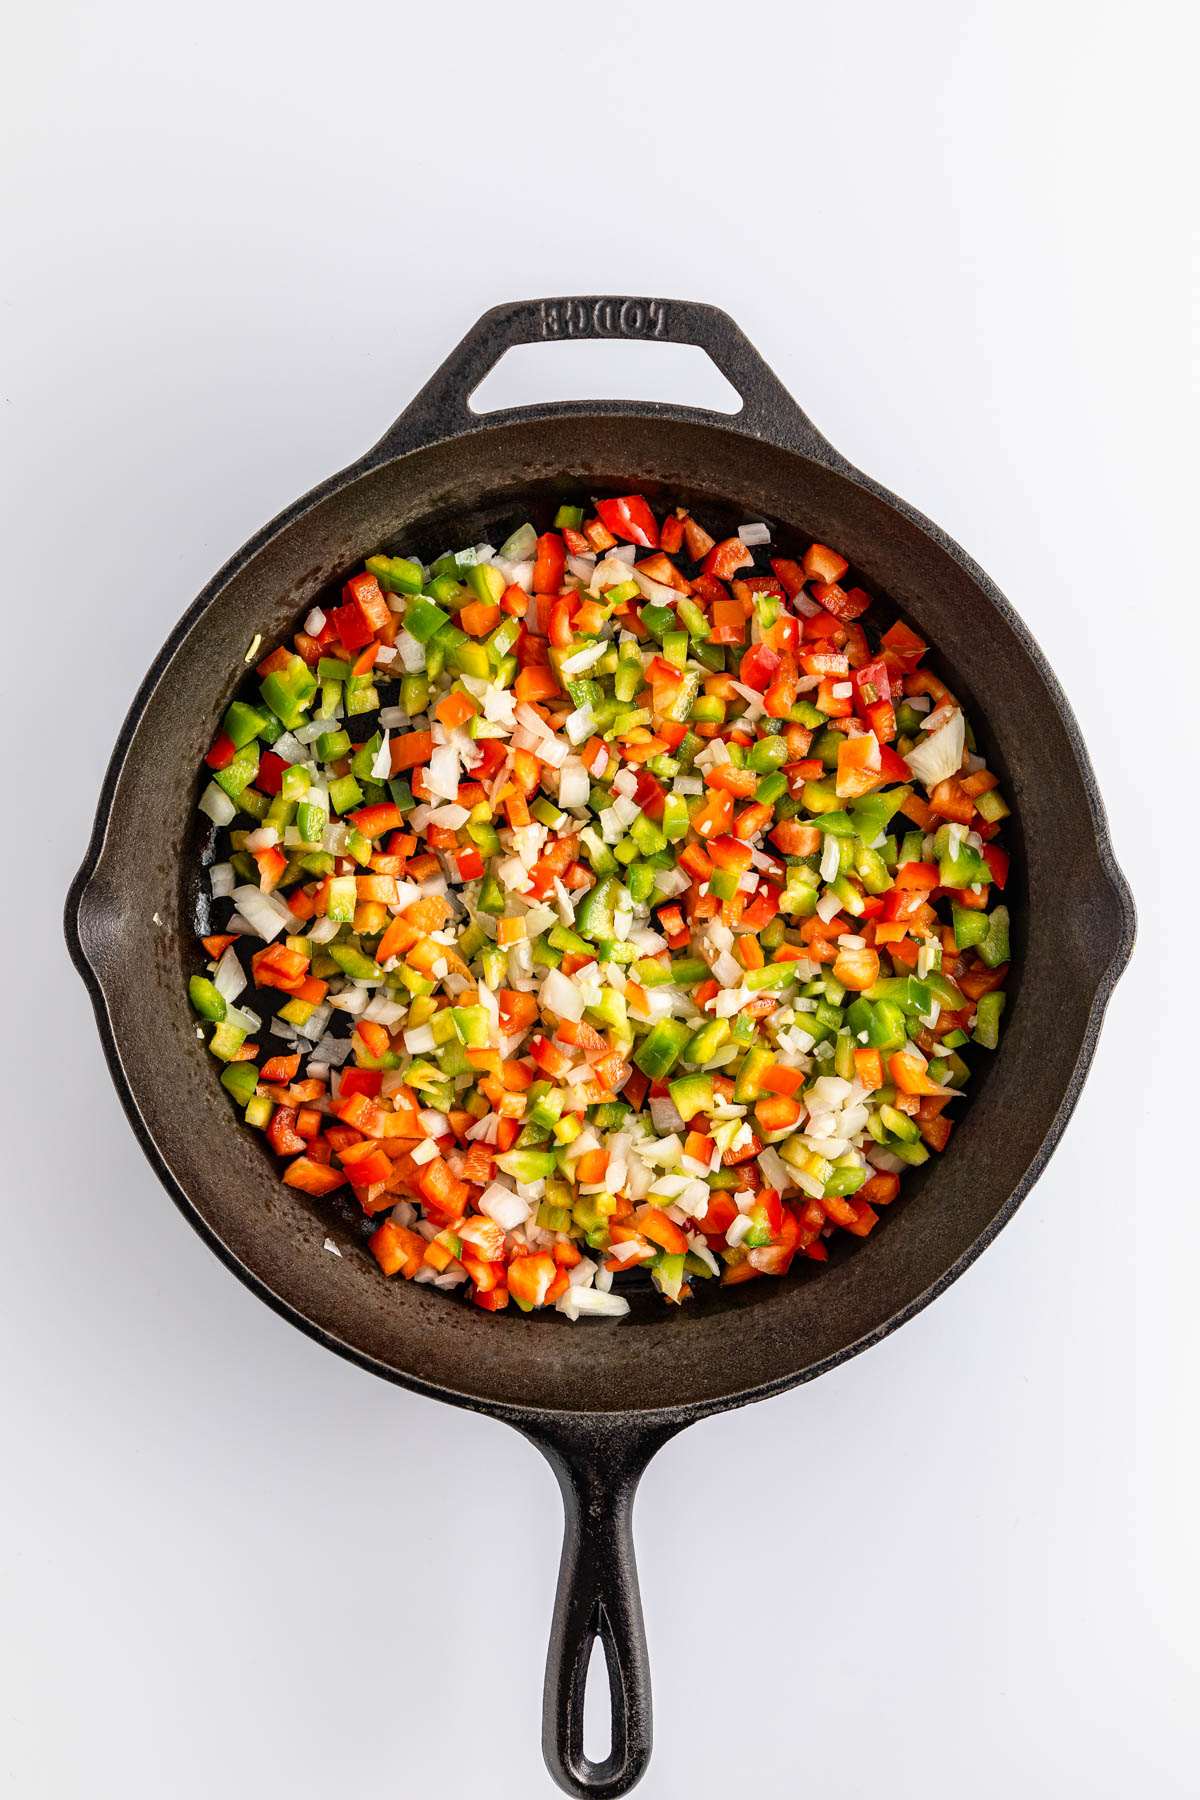 Diced vegetables in a cast iron skillet.